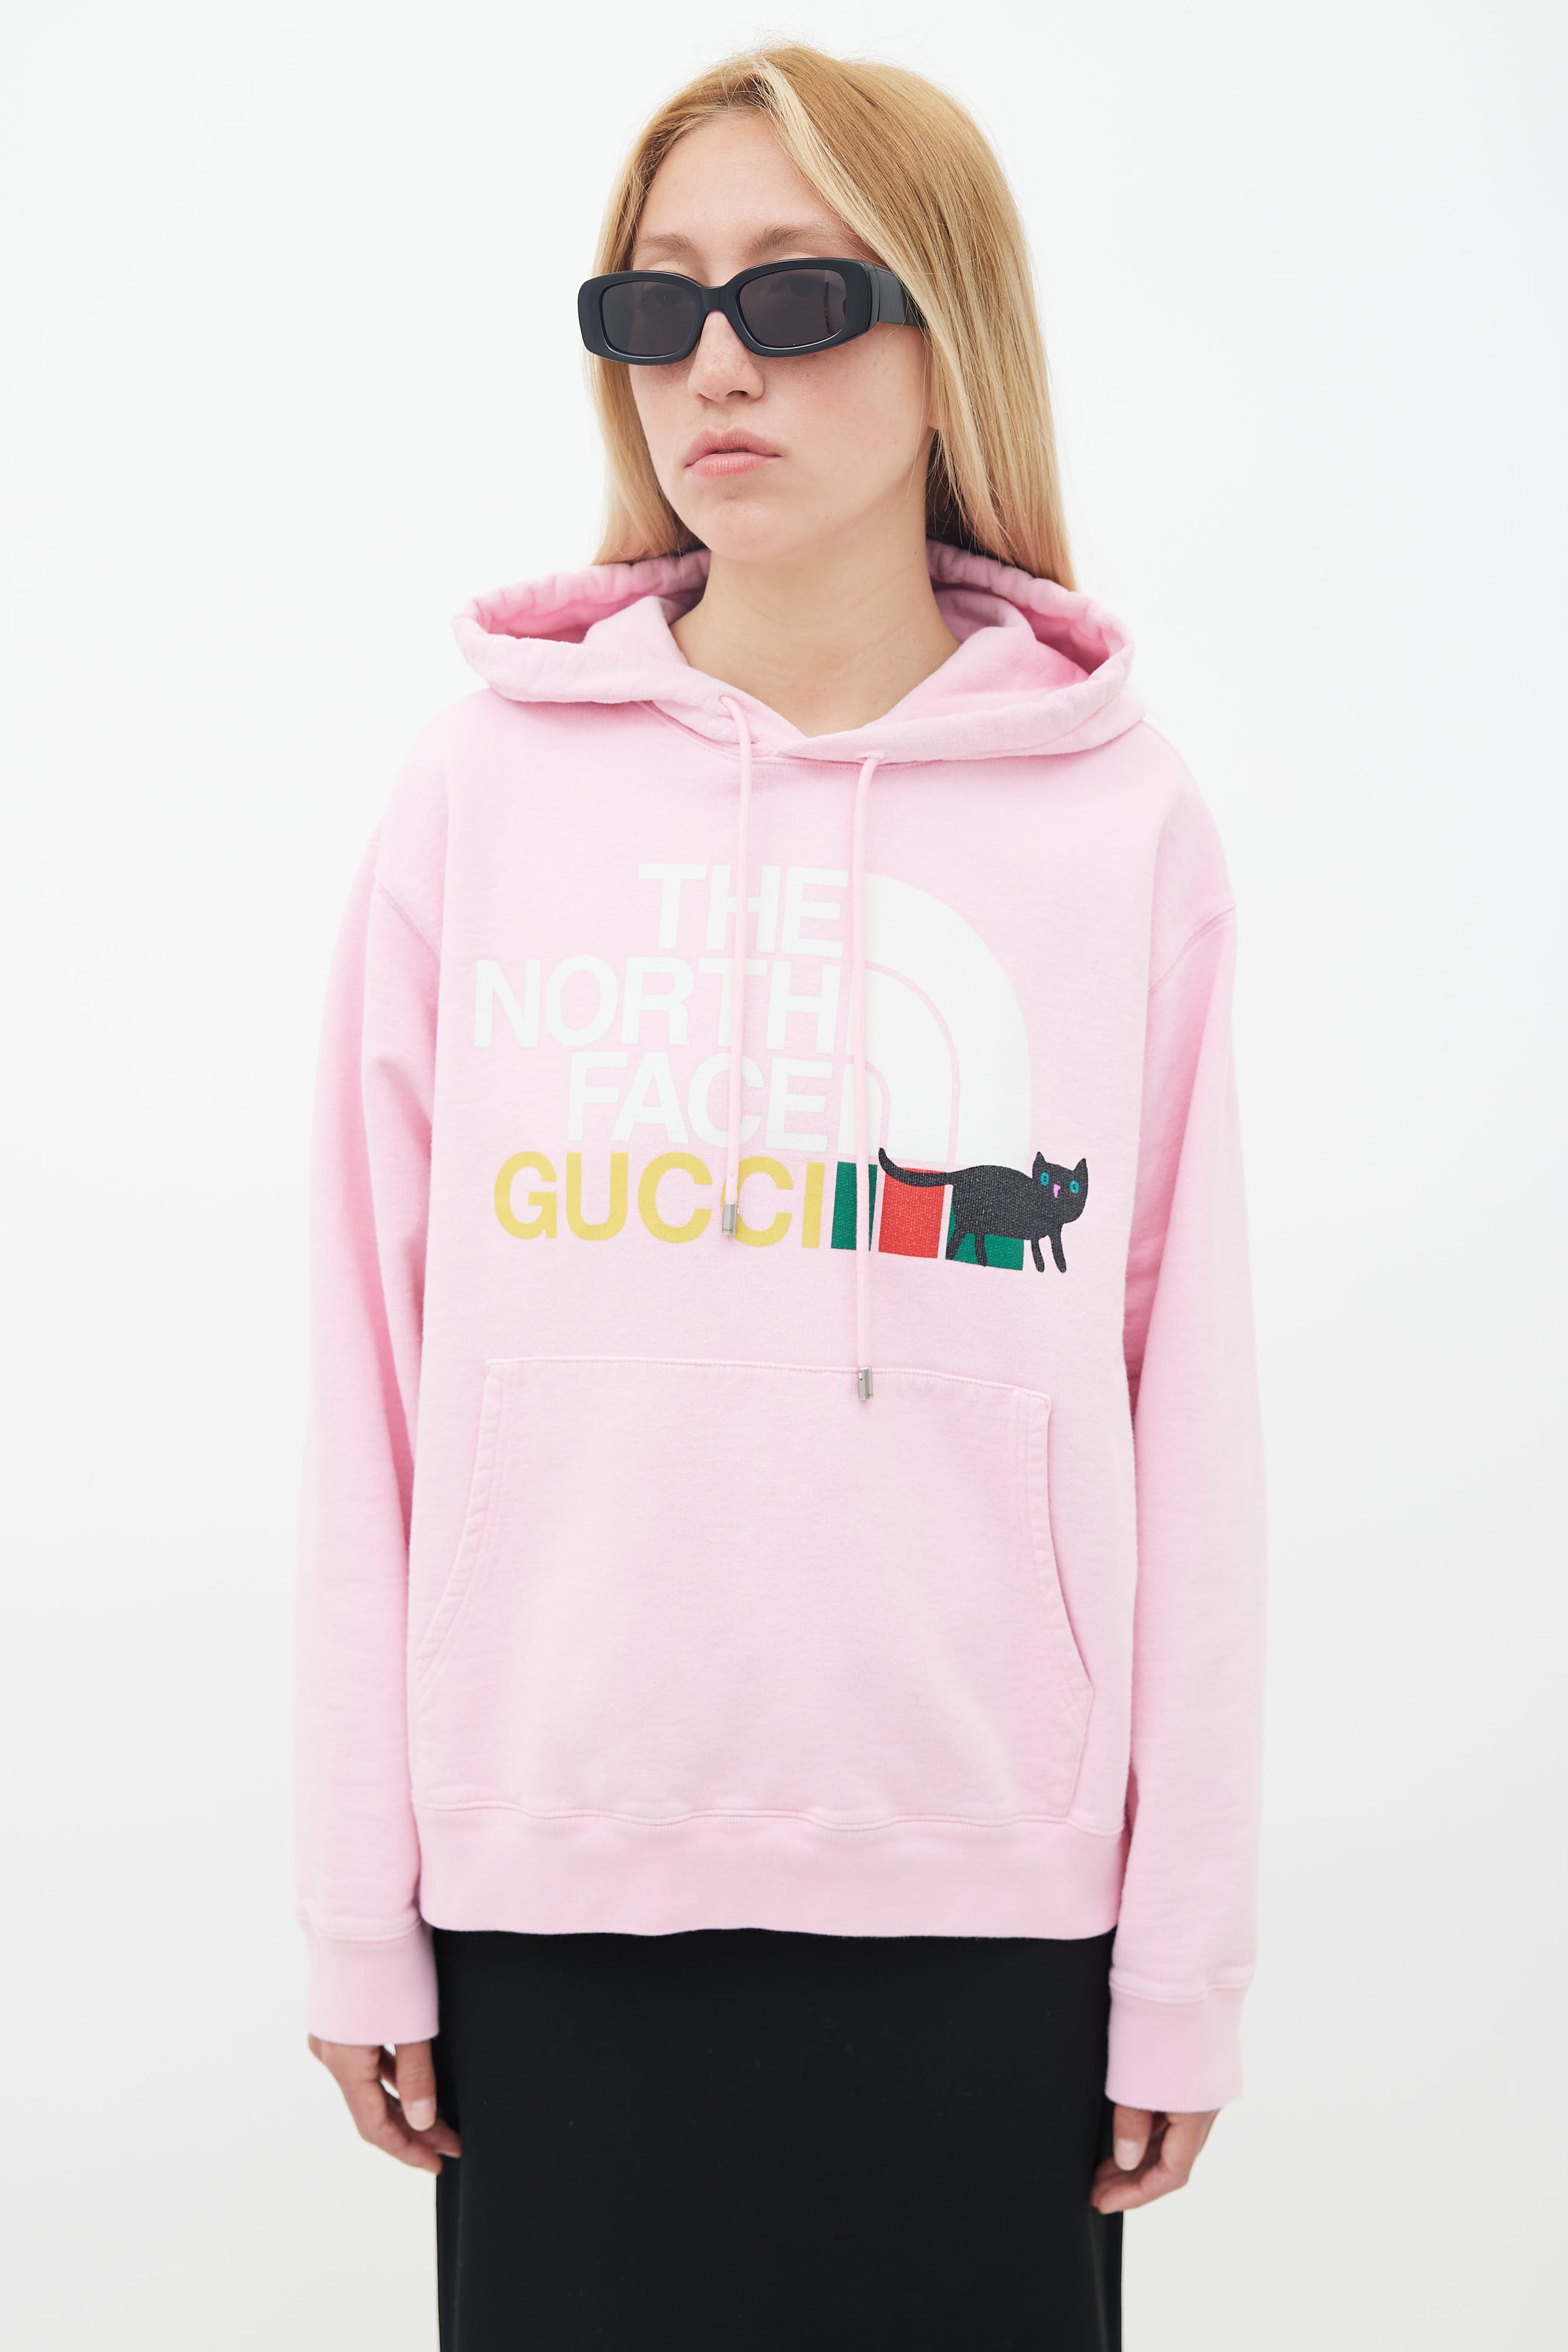 The North Face Gucci Youth Hoodie 